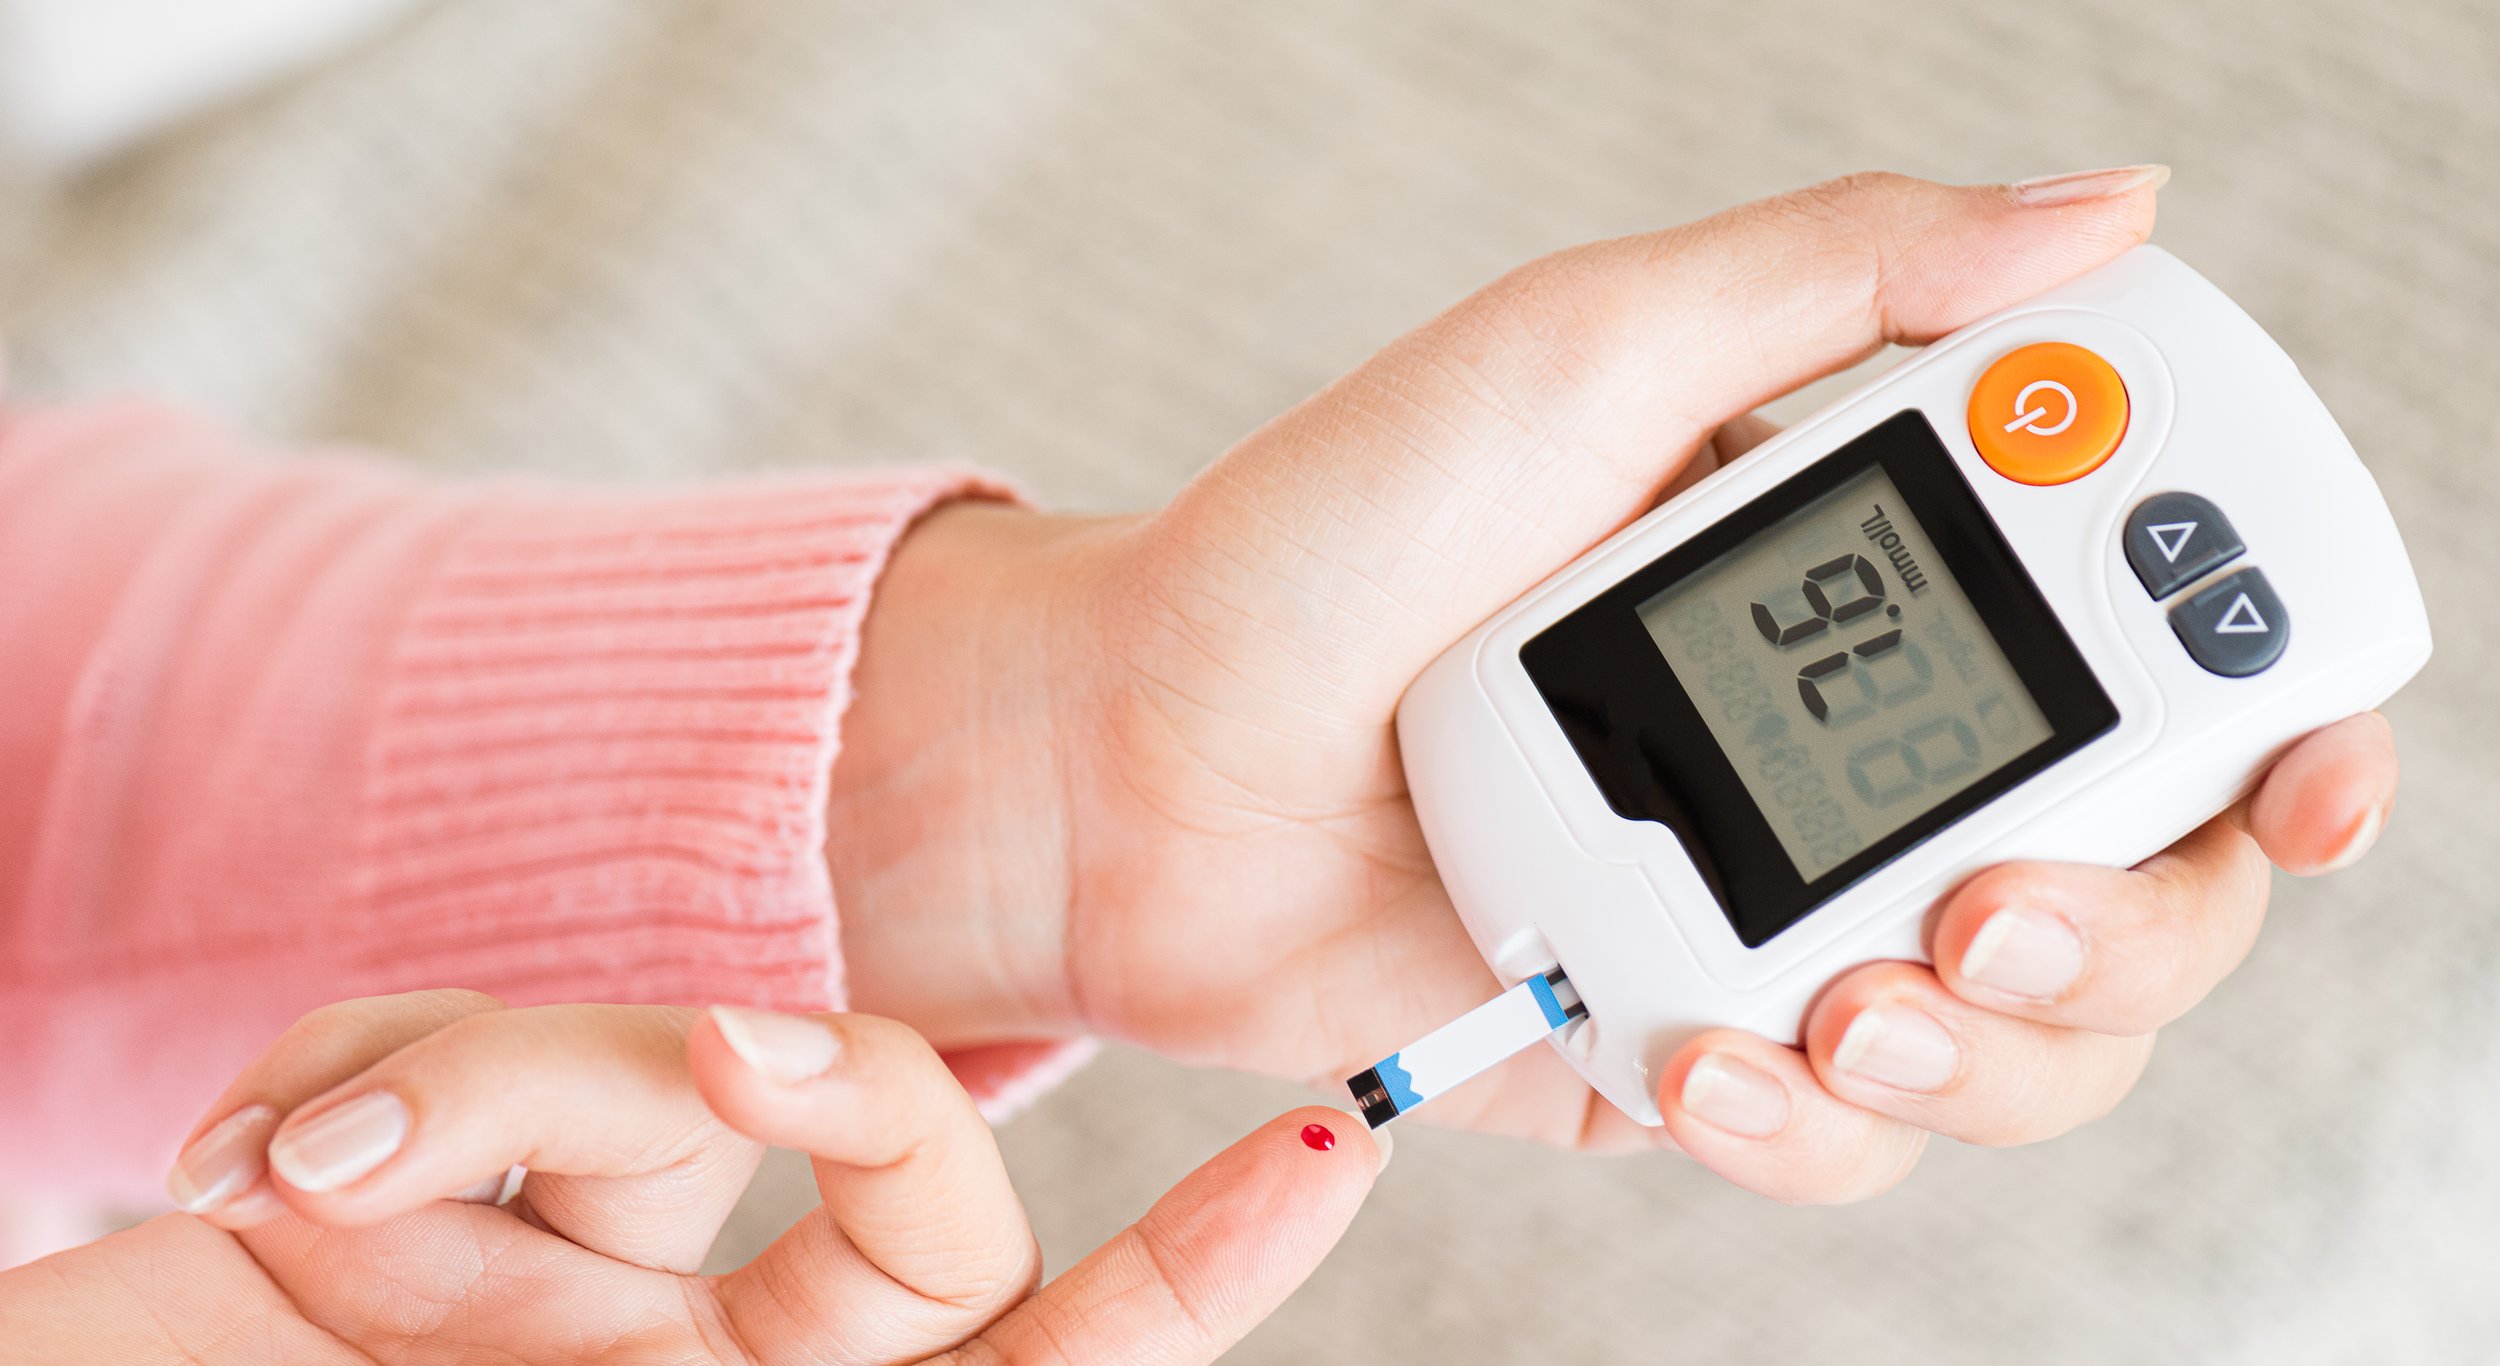 When is A Good Time To Check Your Blood Sugar?